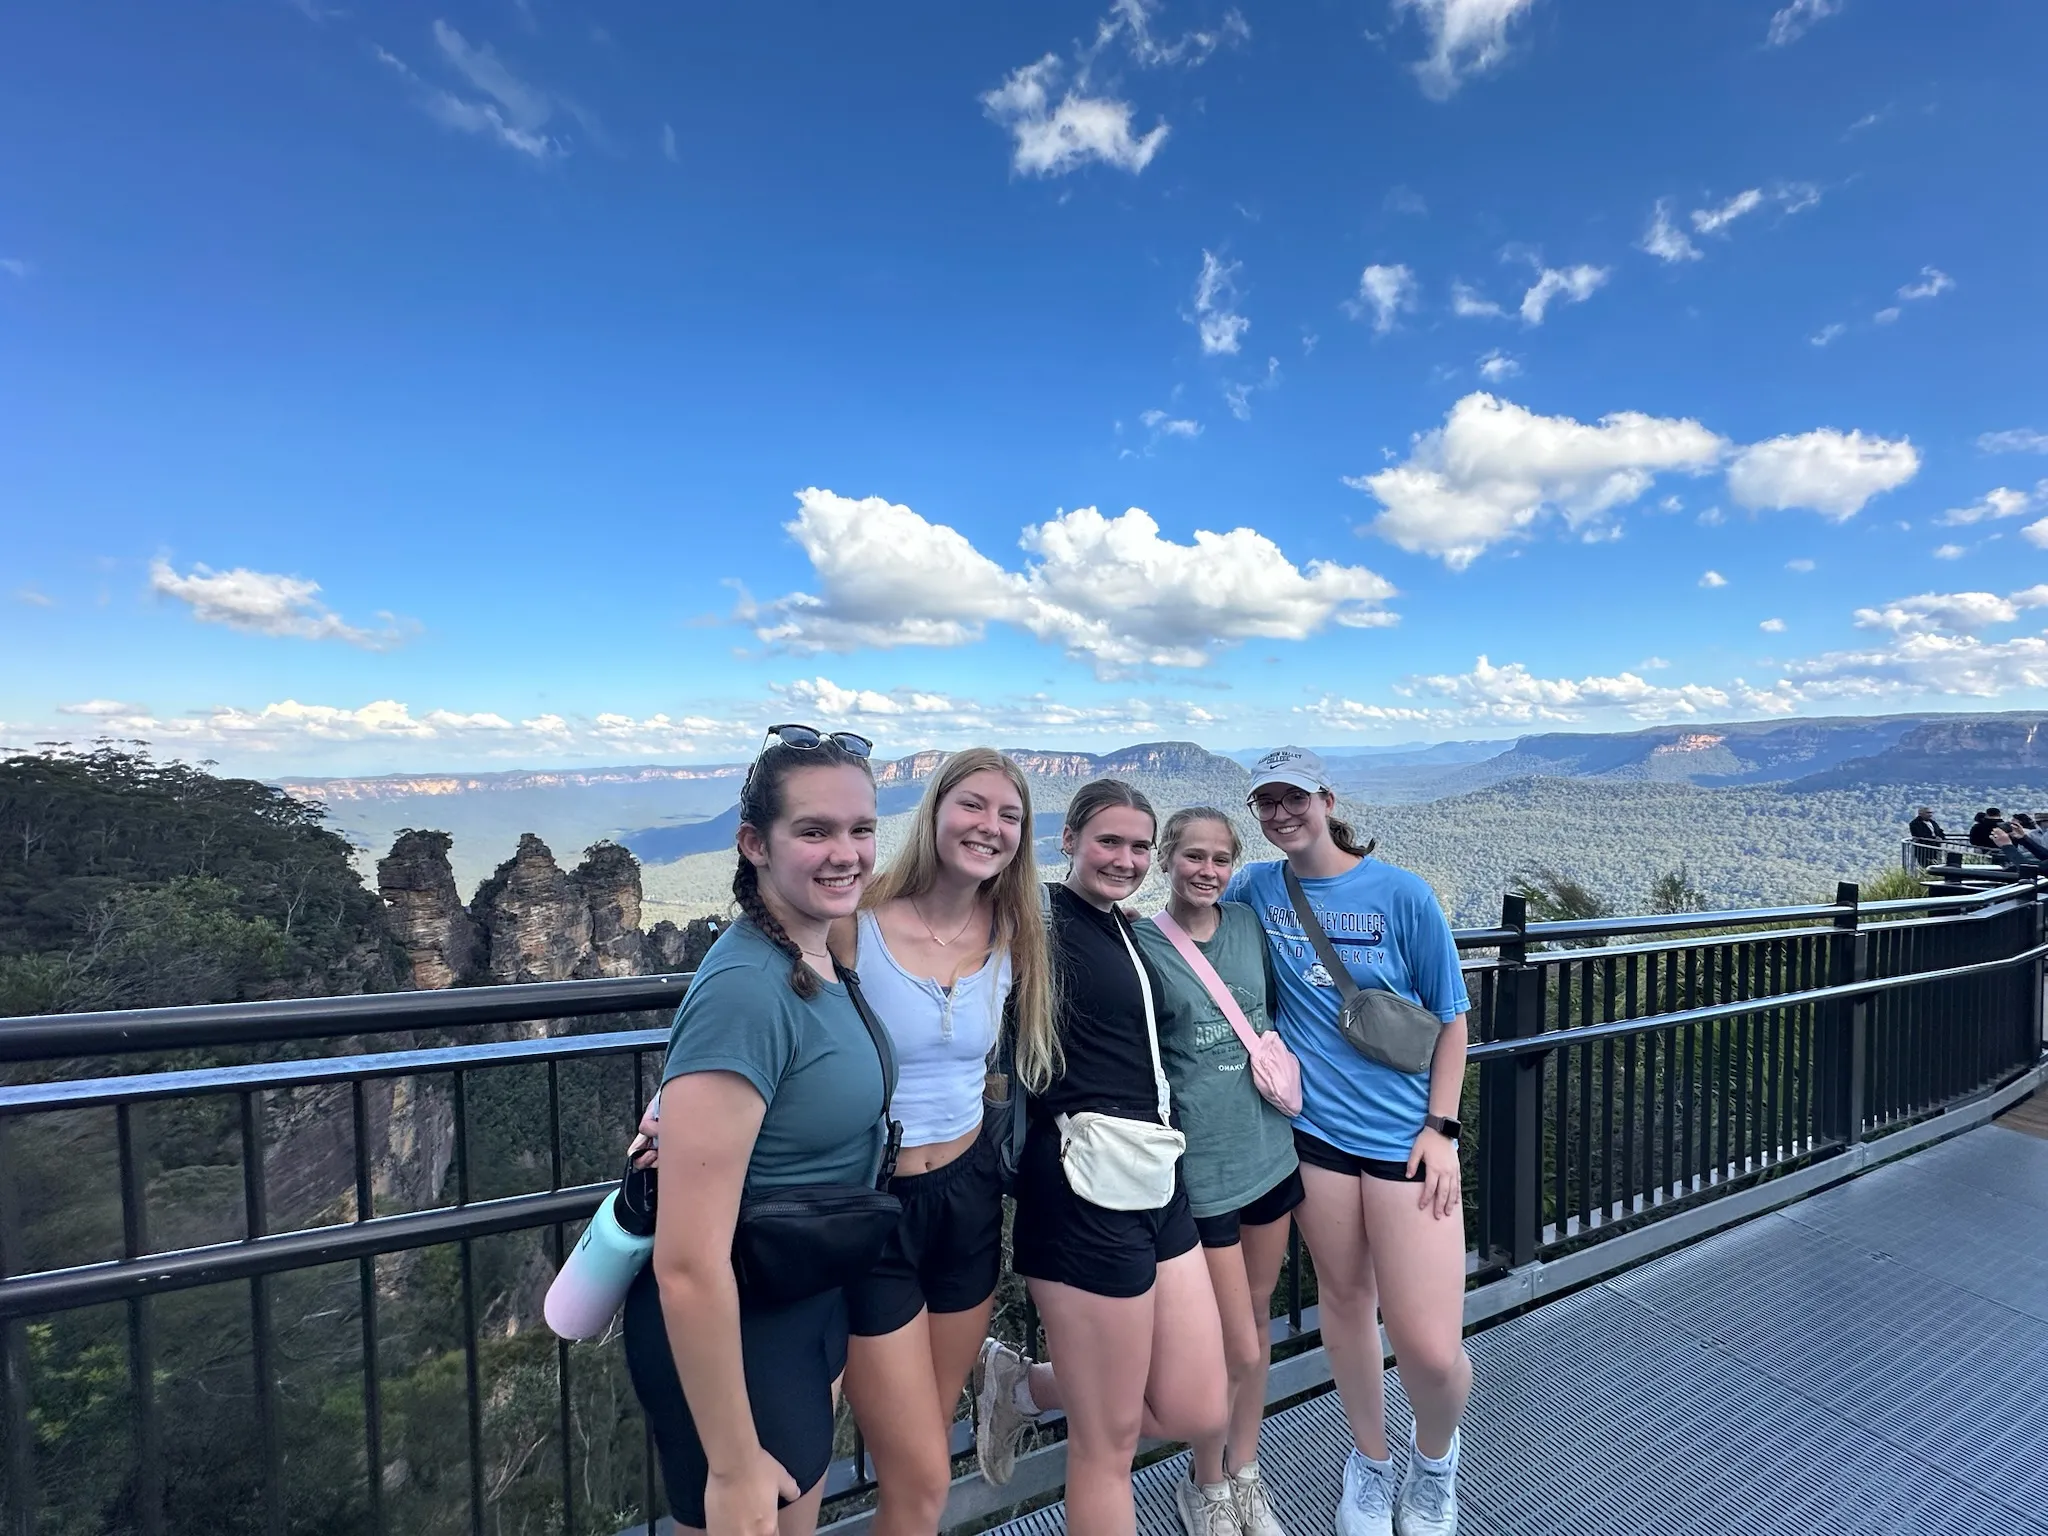 LVC students visit Three Sisters at Echo Point in Australia